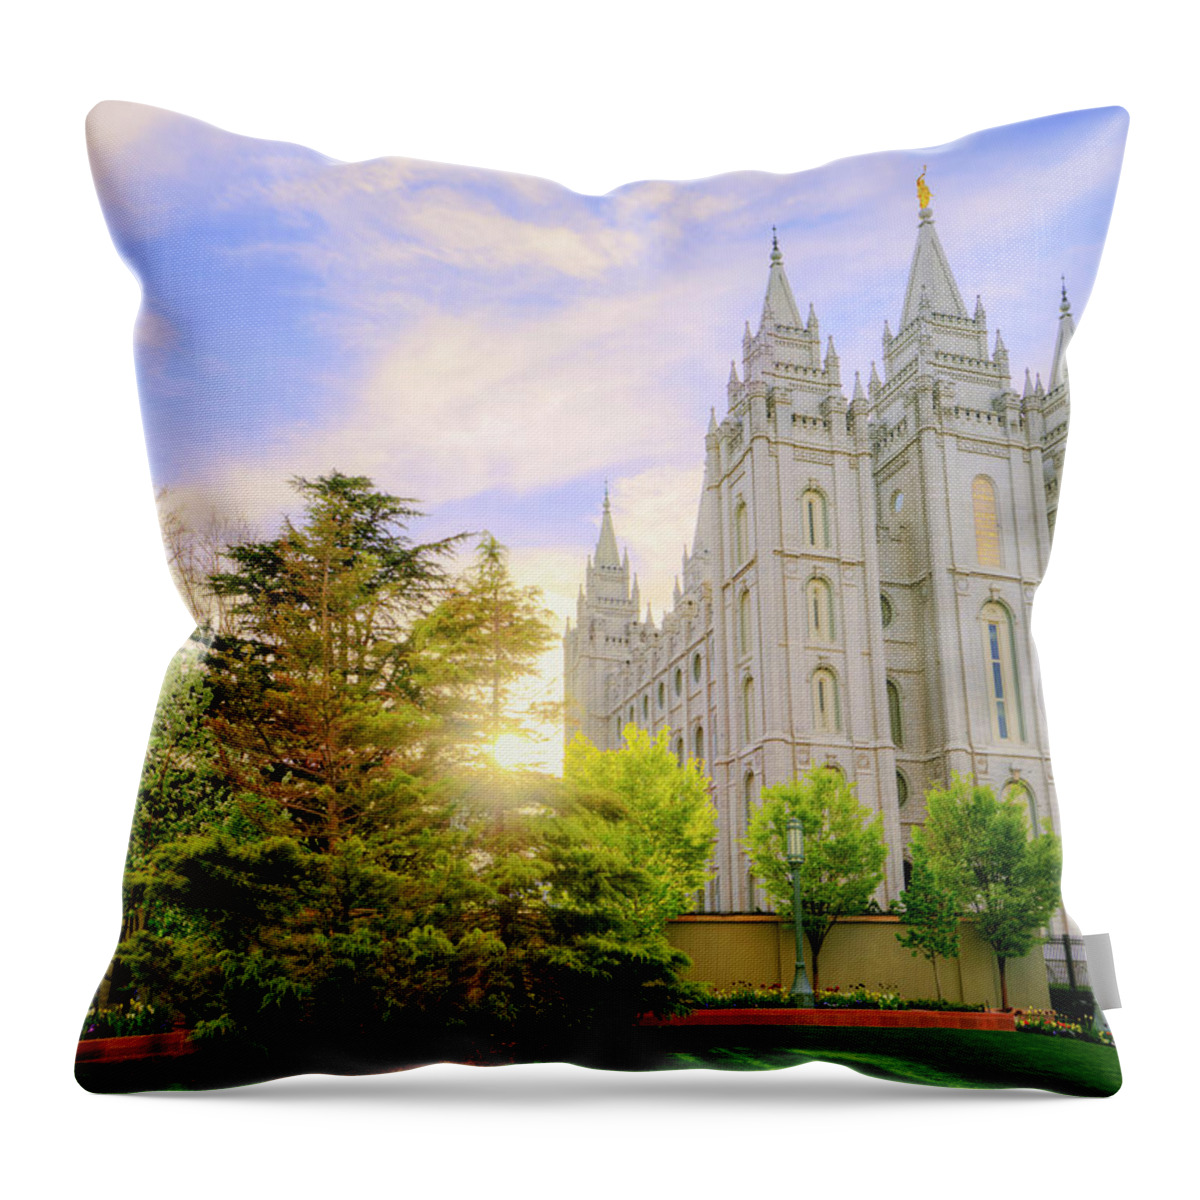 Salt Lake Throw Pillow featuring the photograph Spring Rest by Chad Dutson